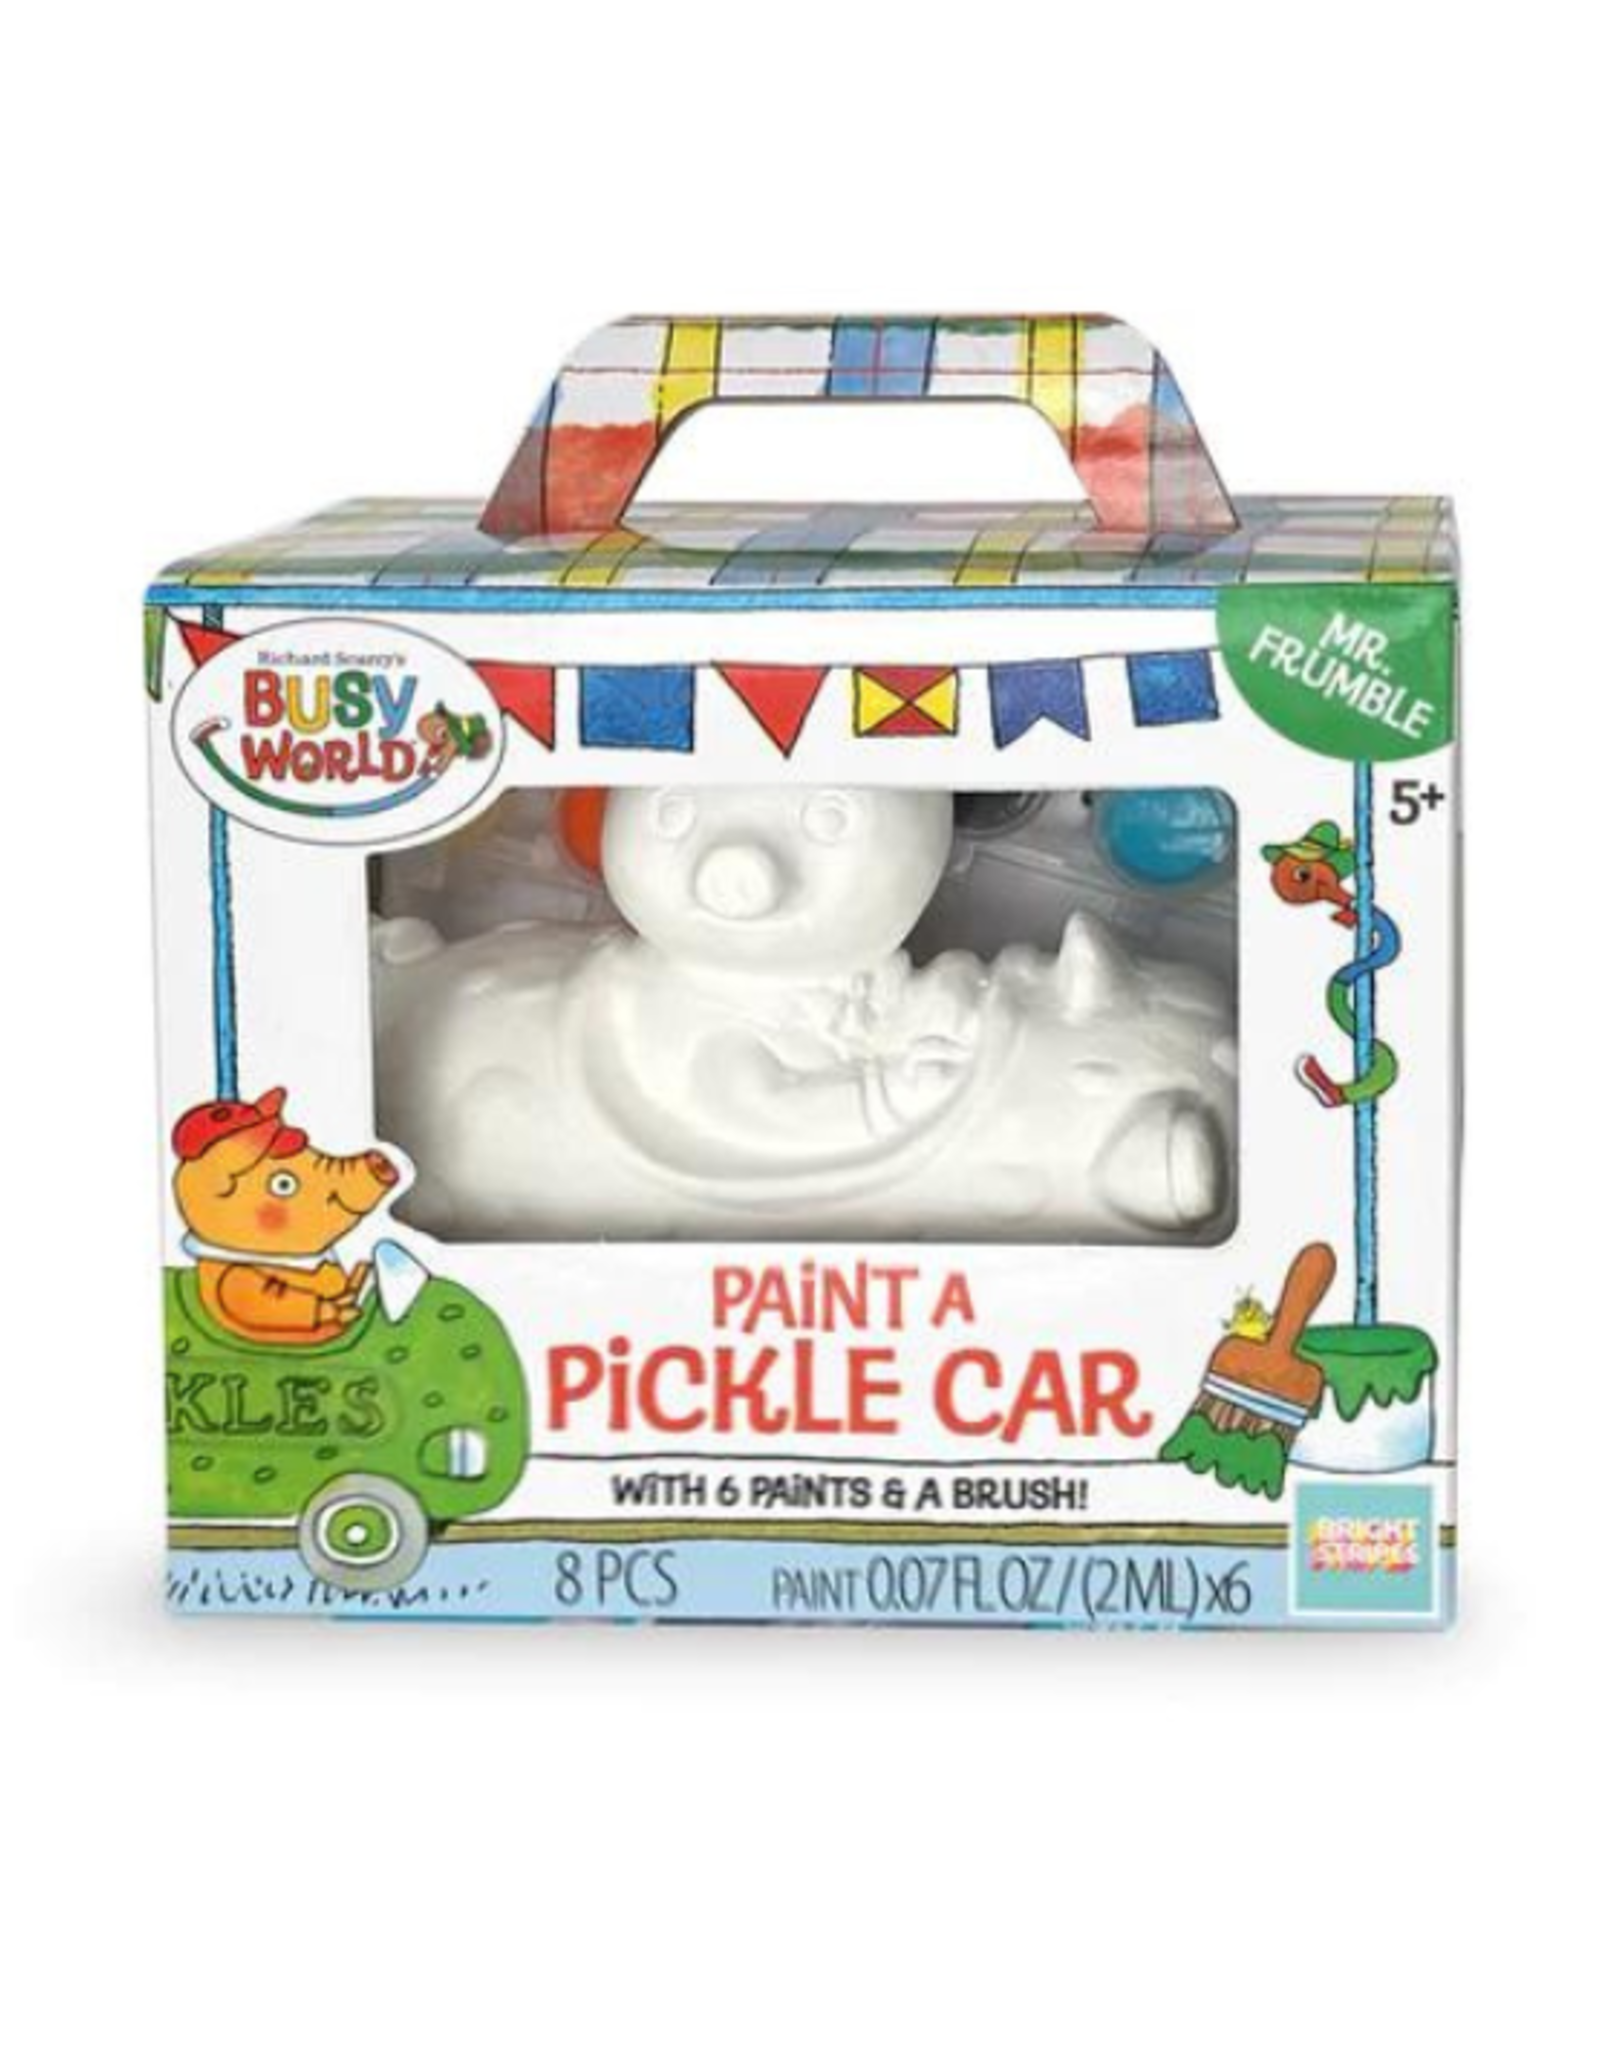 Busy World Richard Scarry's Busy World - Paint A Pickle Car: Mr. Frumble